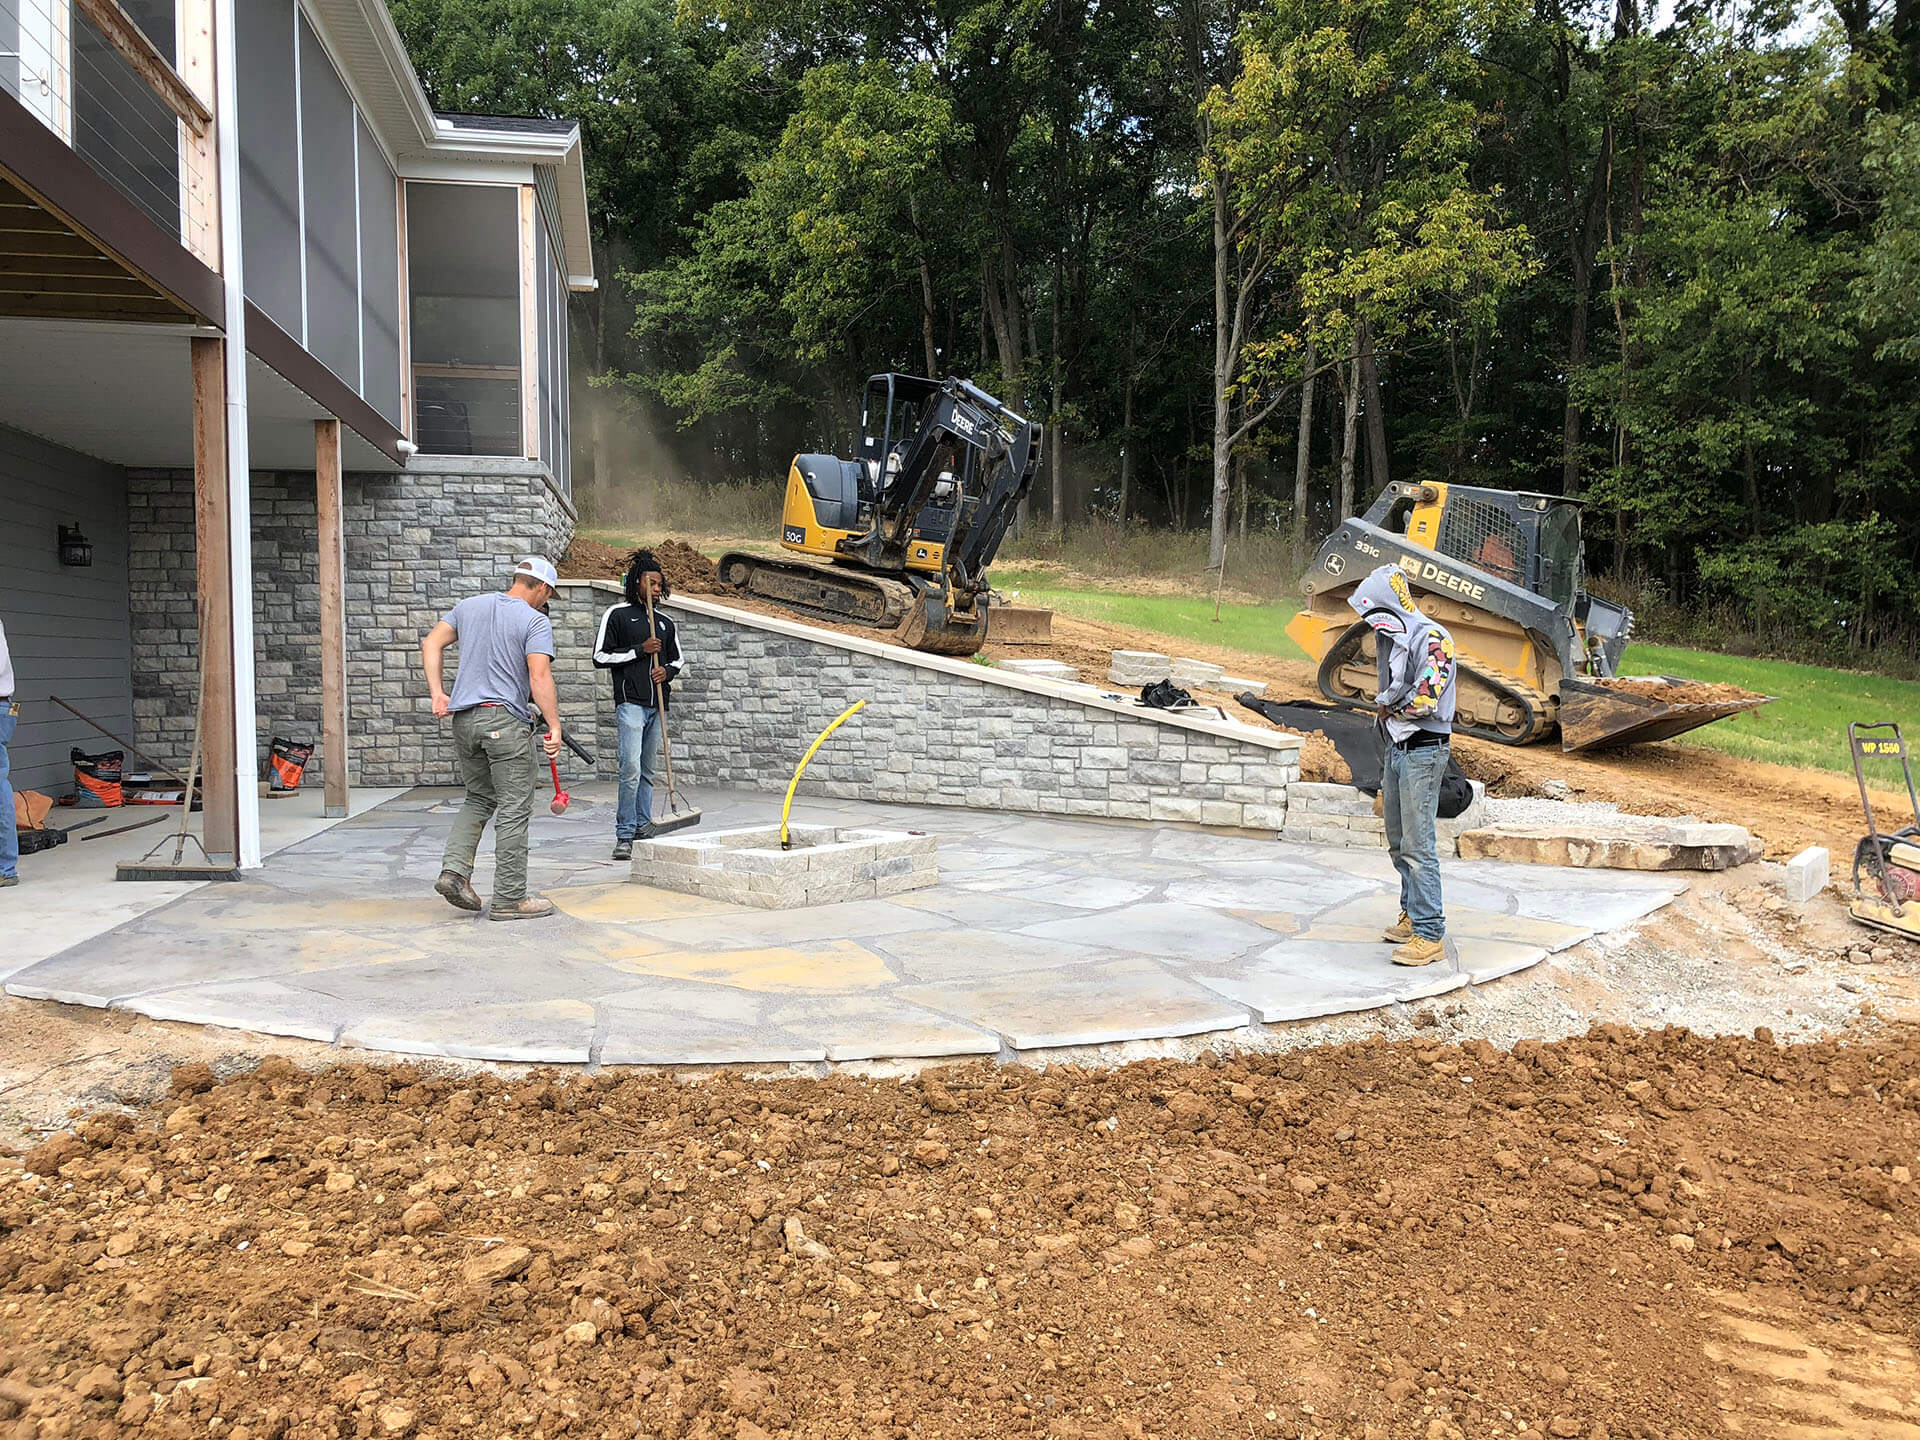 stone patio and steps Advance, MO Project